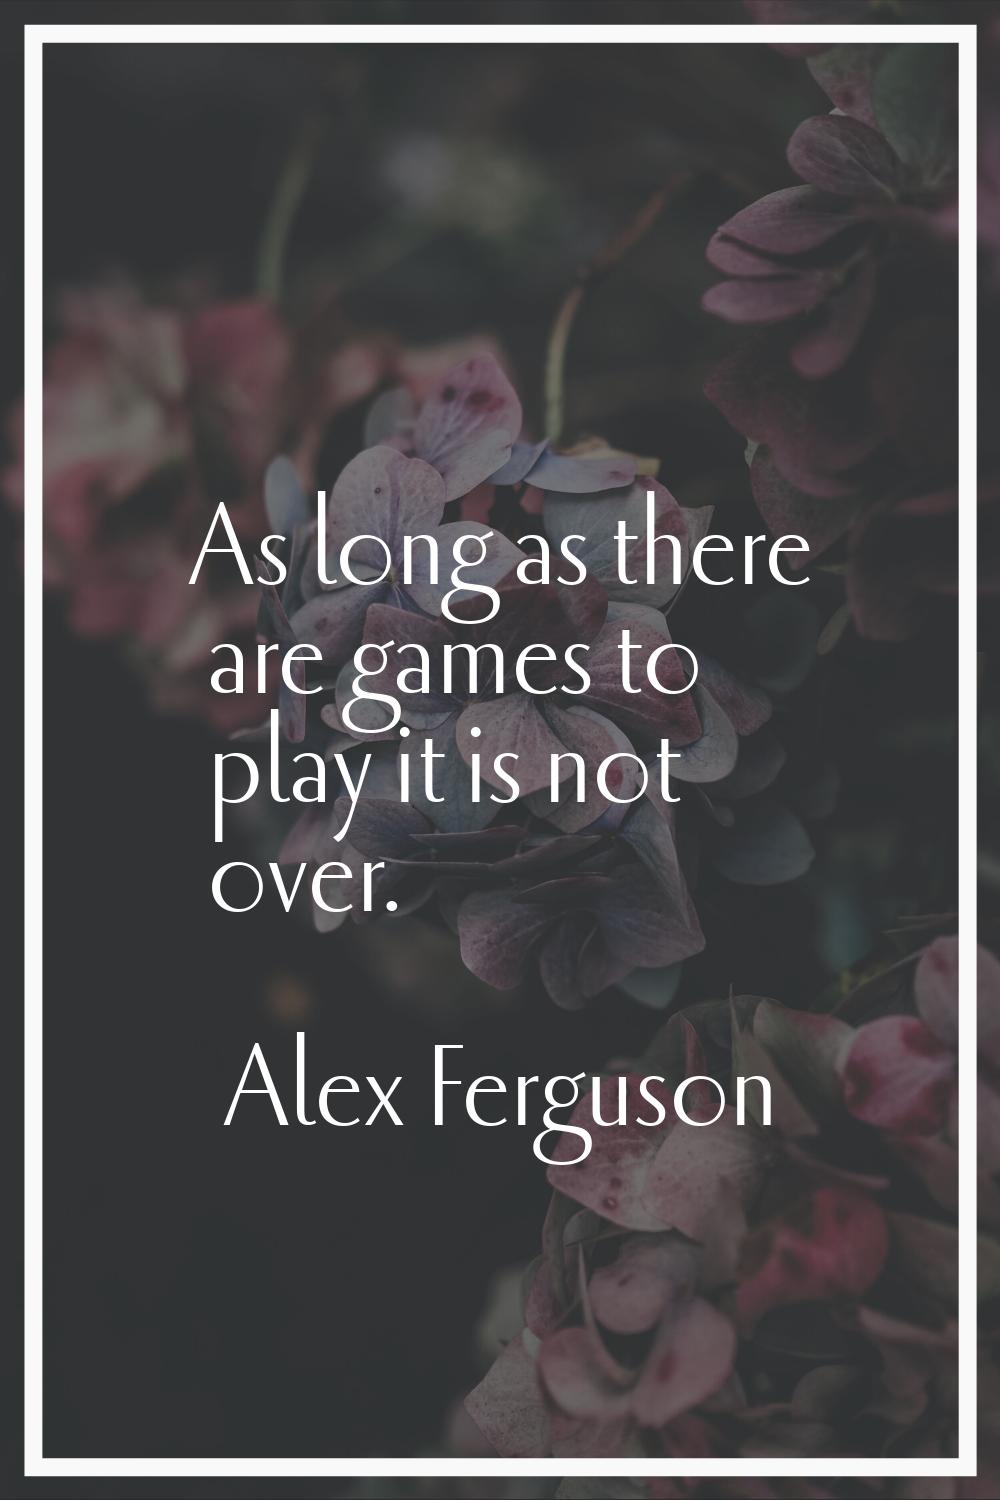 As long as there are games to play it is not over.